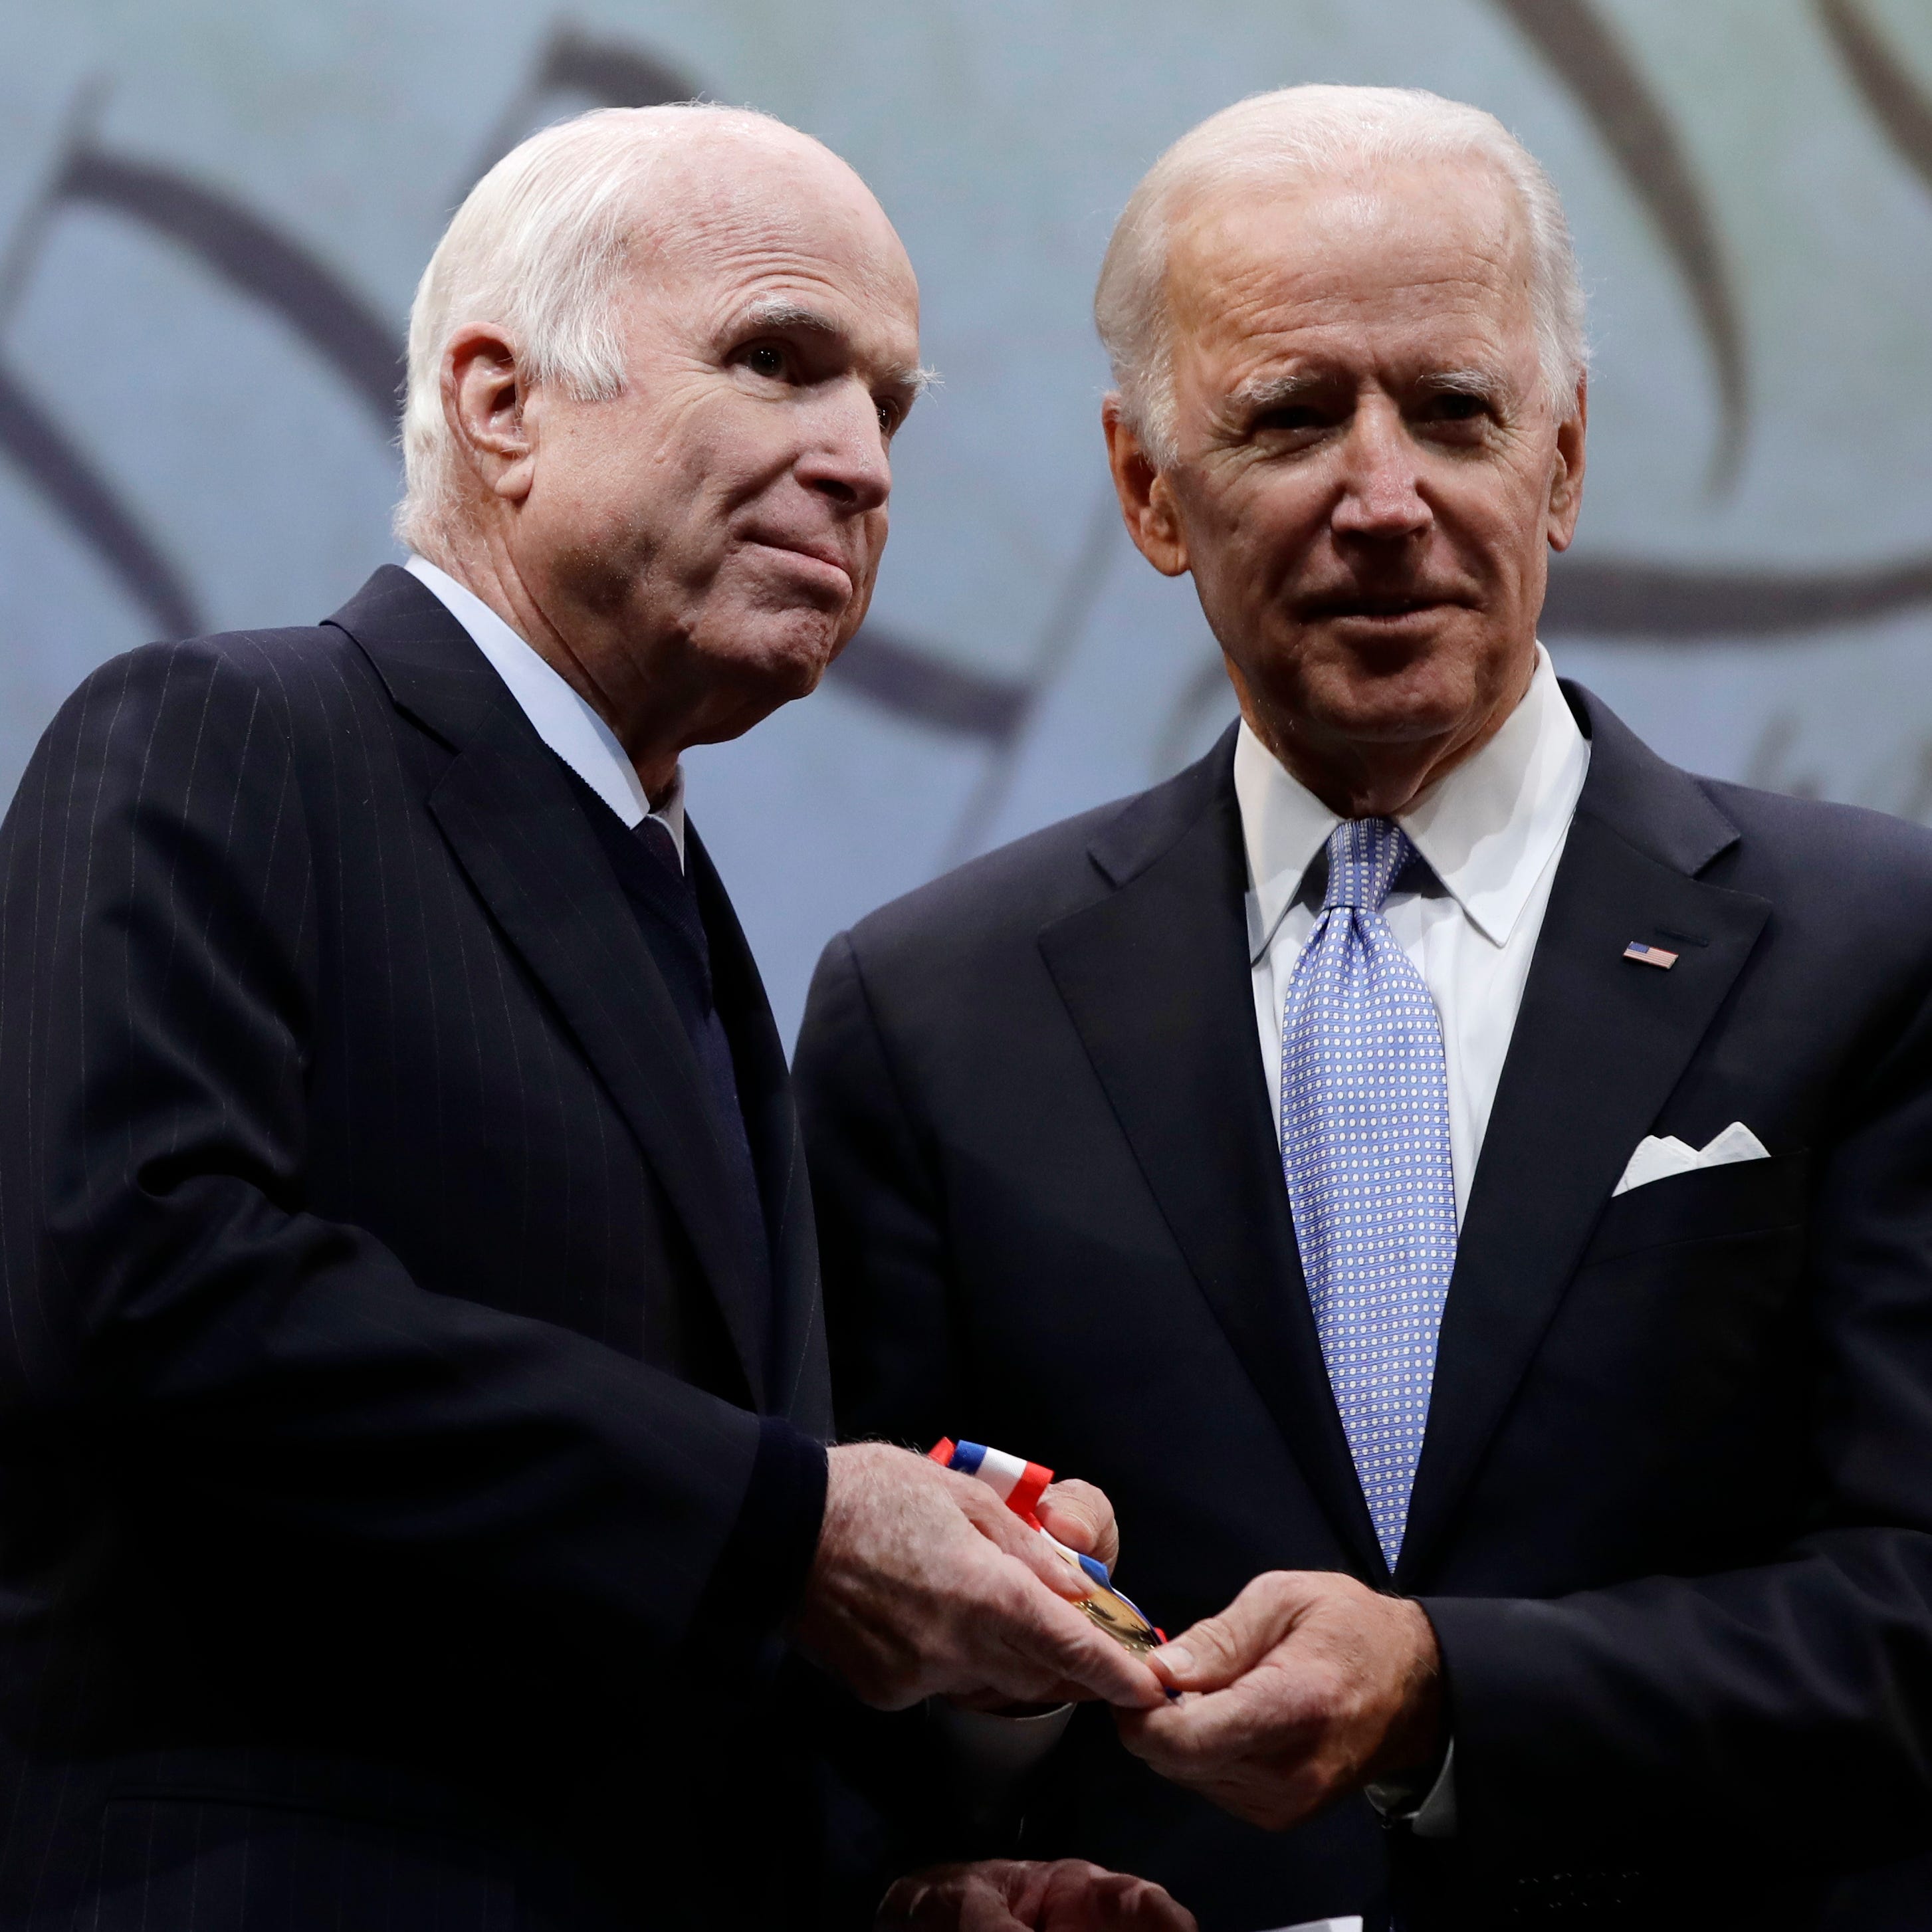 Sen. John McCain, R-Ariz., receives the Liberty Medal from Chair of the National Constitution Center's Board of Trustees, former Vice President Joe Biden, and center President and CEO Jeffrey Rosen in Philadelphia, Monday, Oct. 16, 2017. The honor is